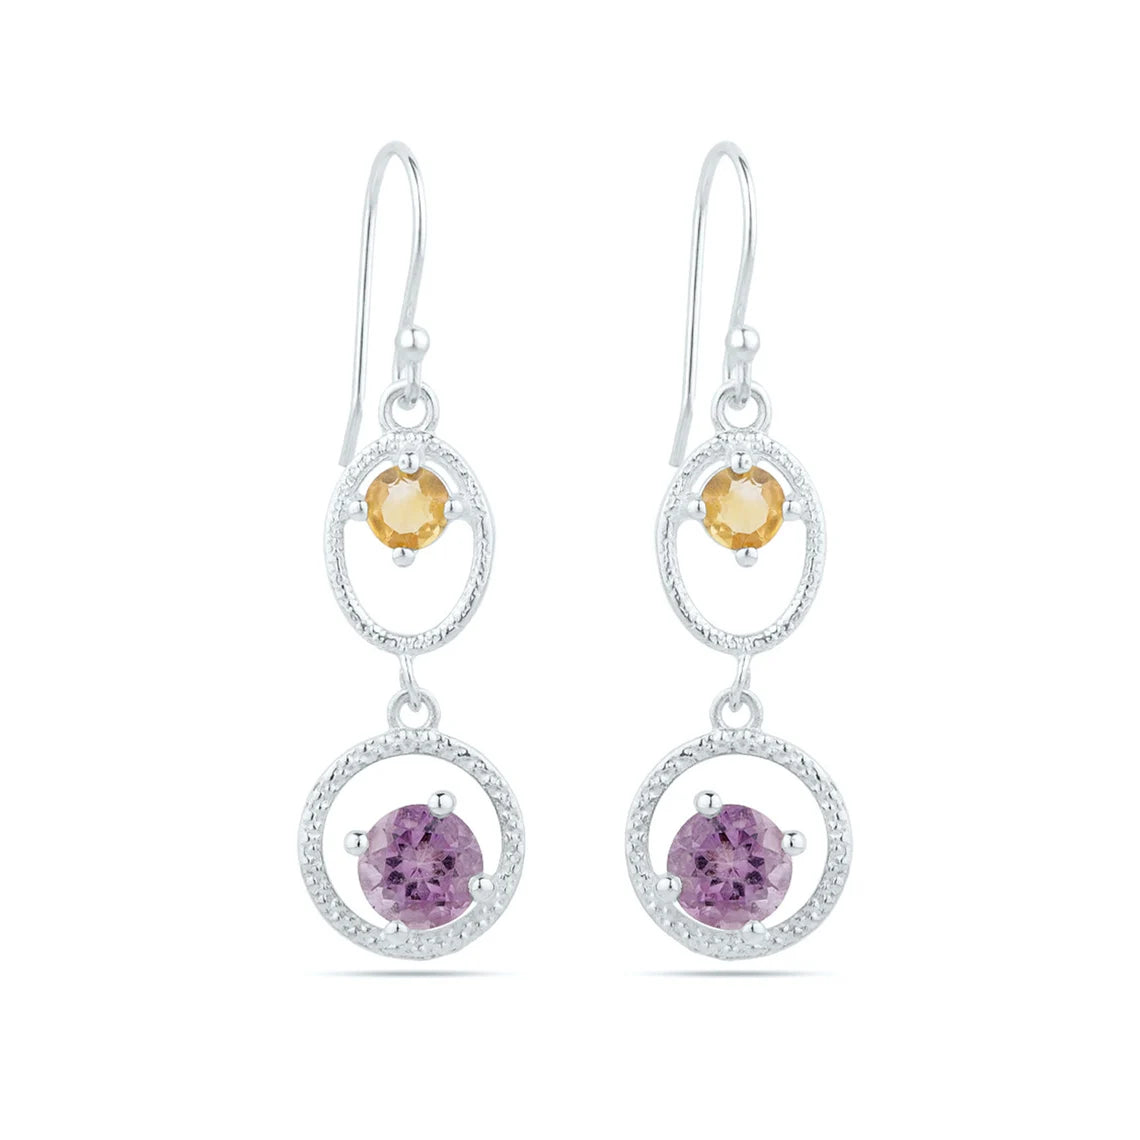 Citrine and Amethyst Earrings - Round amethyst with citrine Gemstone 925 Sterling Silver Earrings